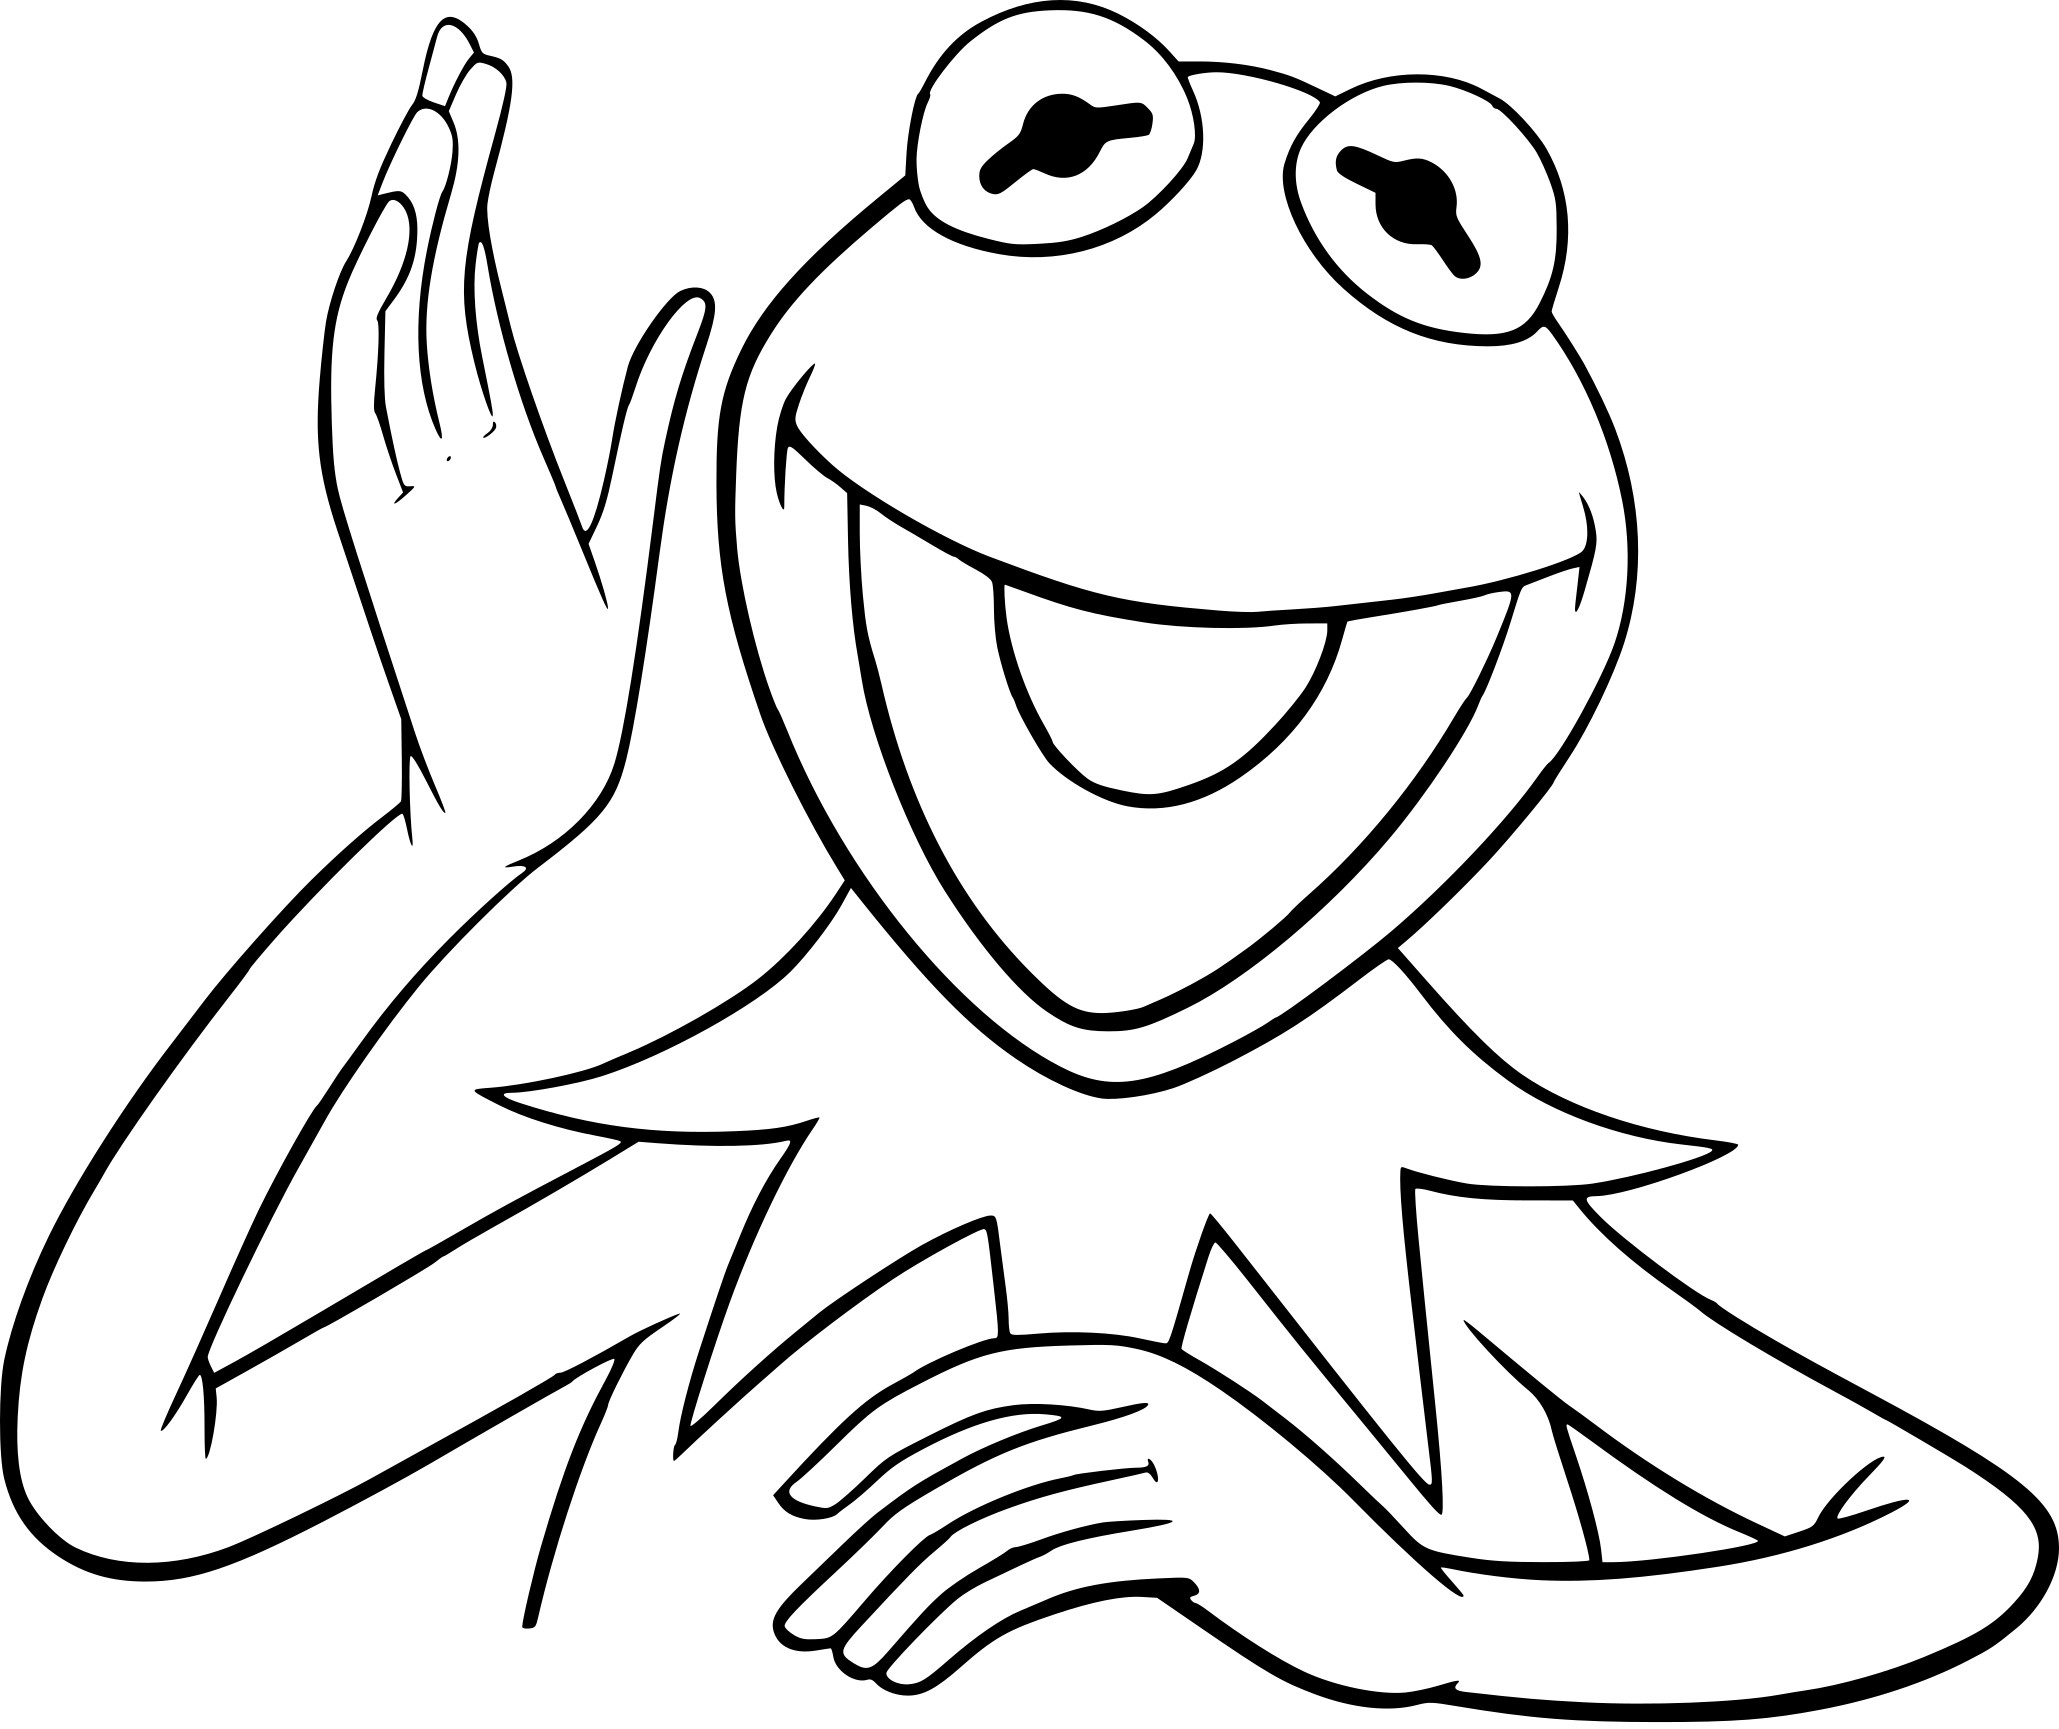 Kermit Muppet coloring page